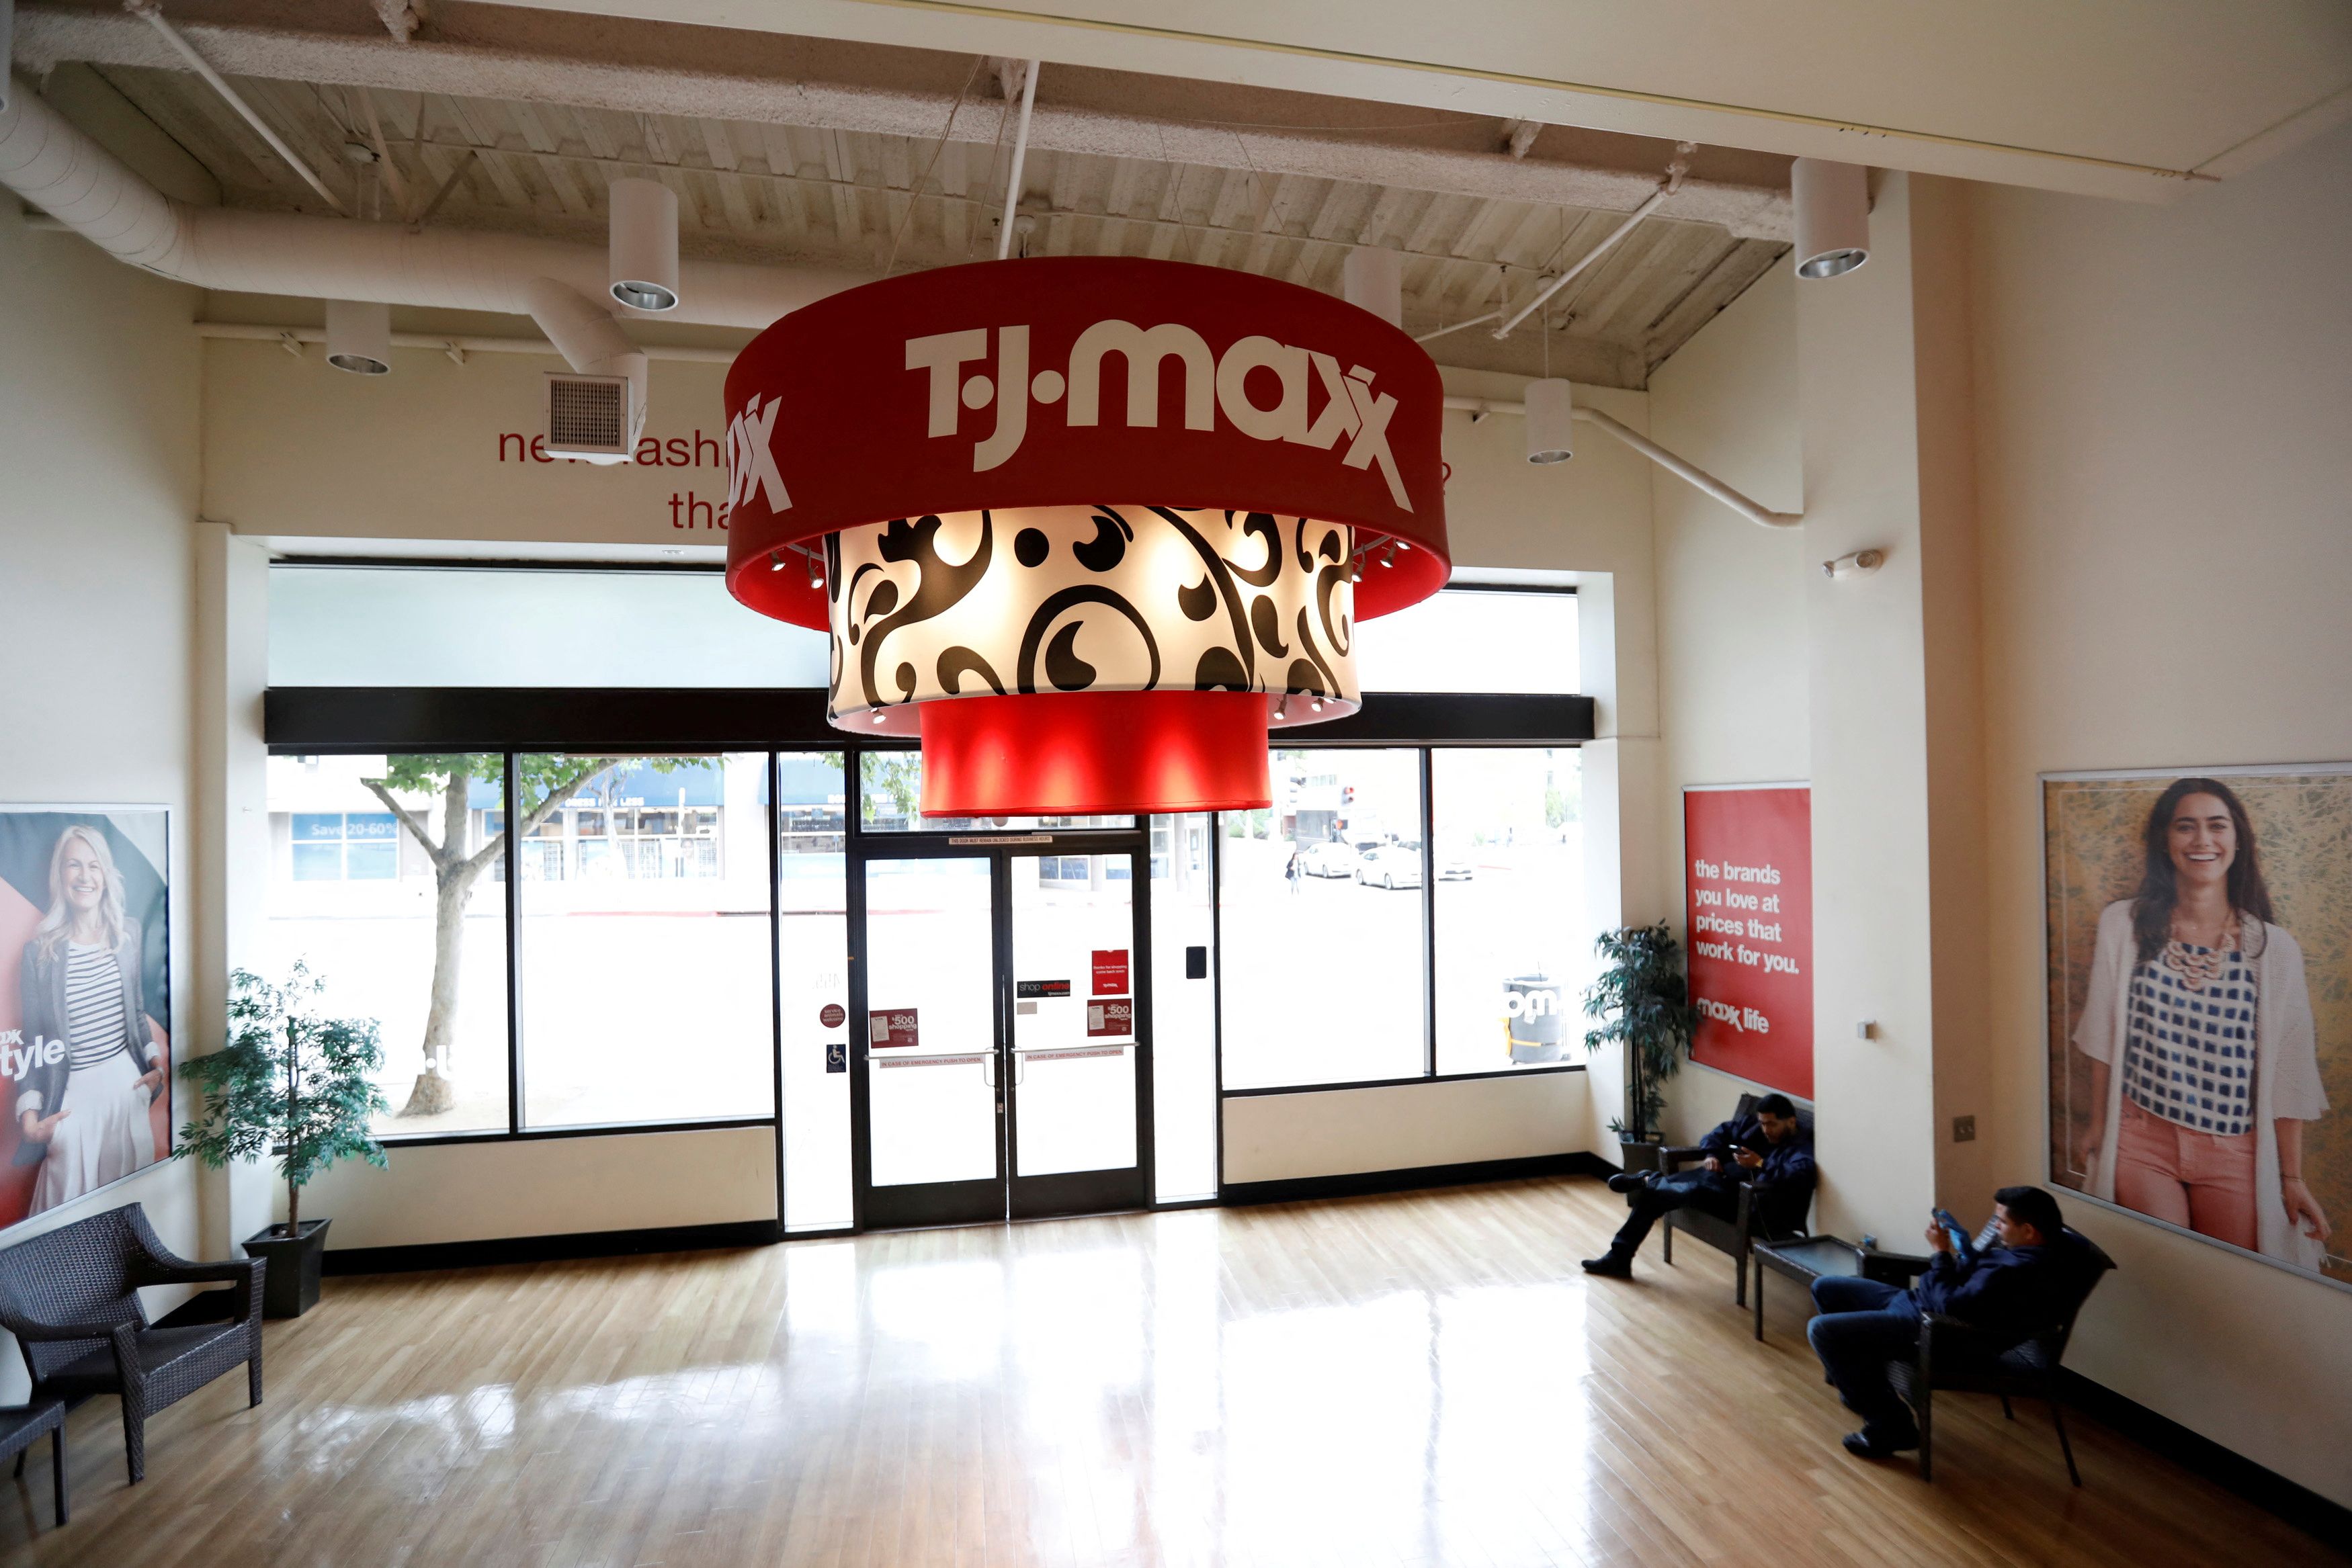 A T.J. Maxx store which is owned by TJX Cos Inc in Pasadena